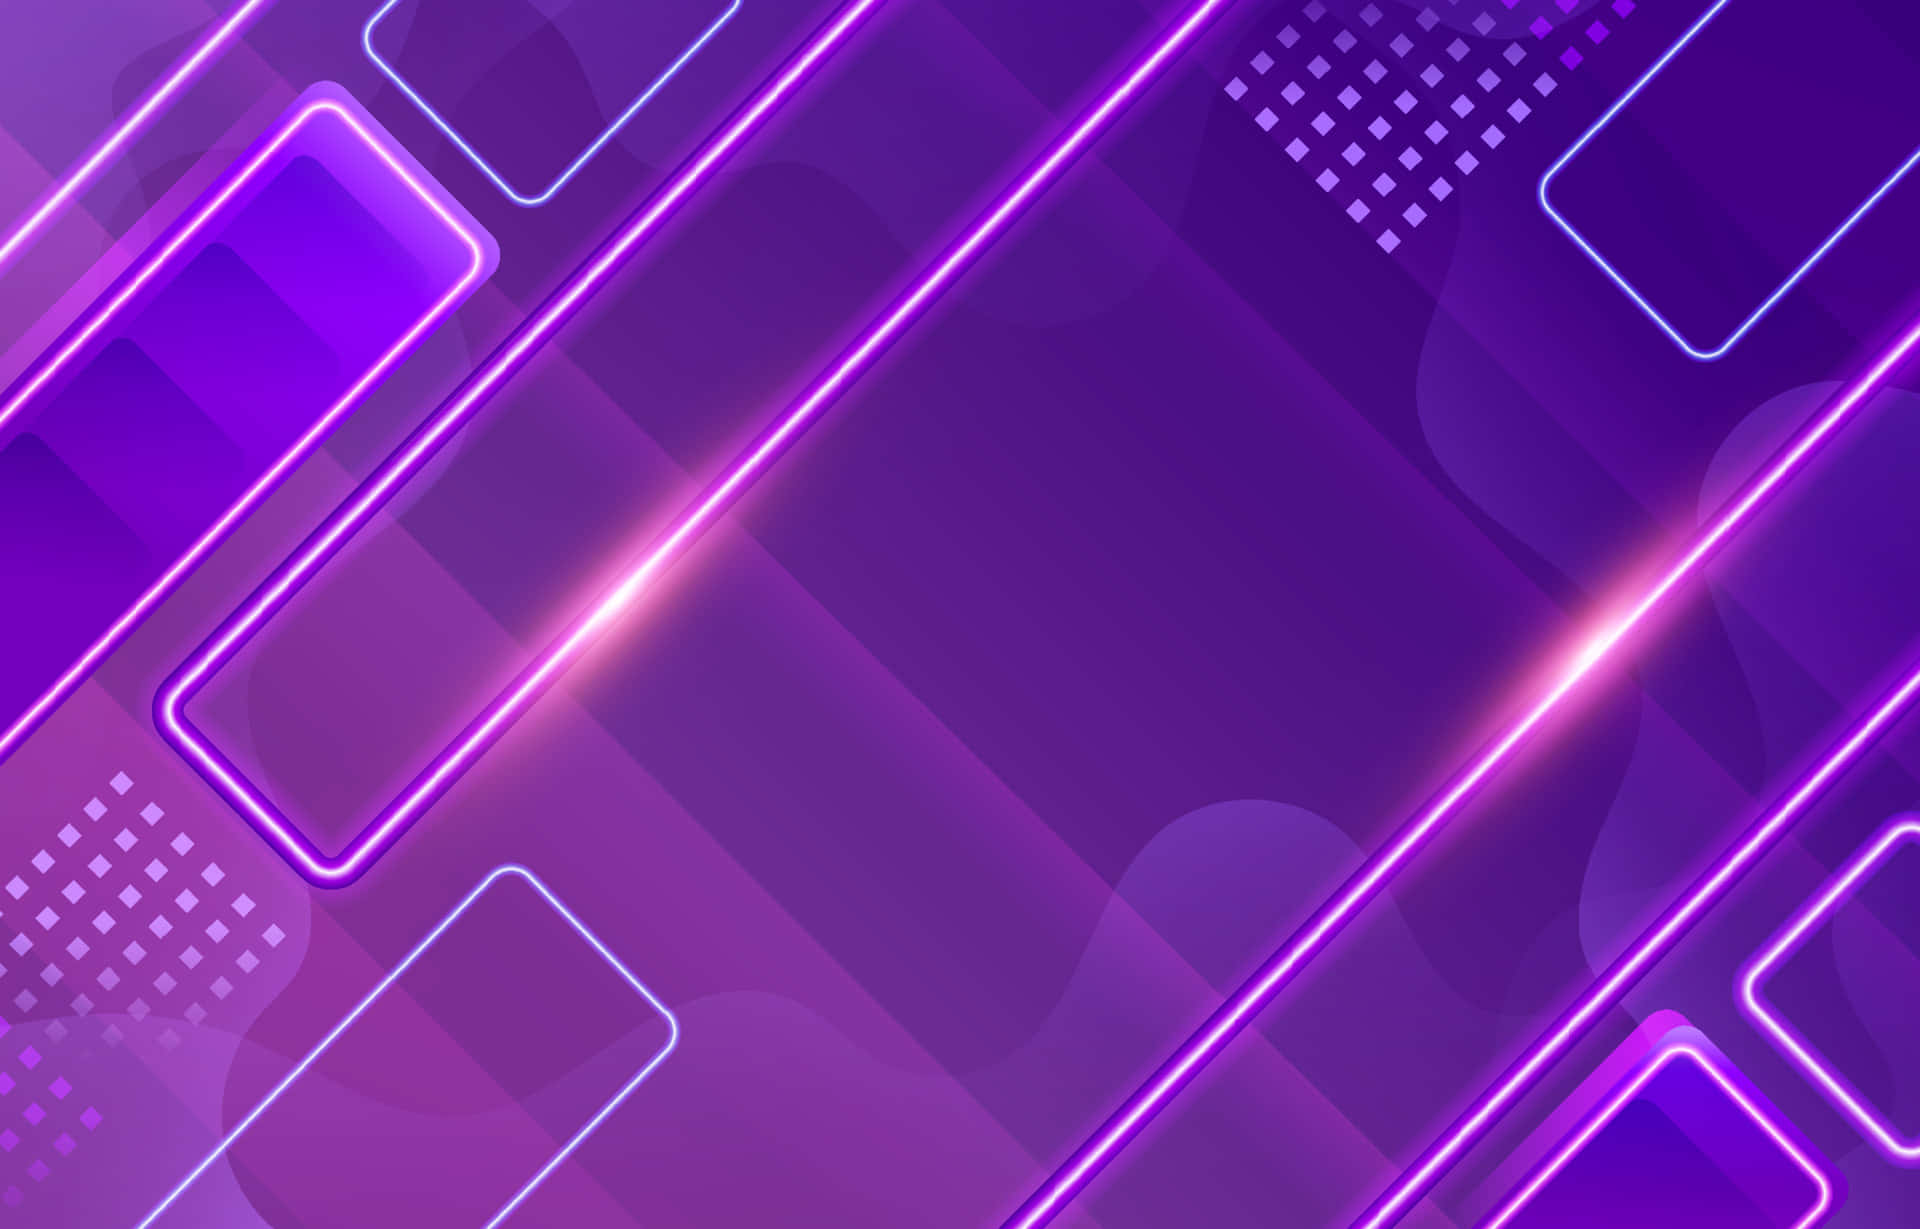 Download purple neon background with lines and squares | Wallpapers.com